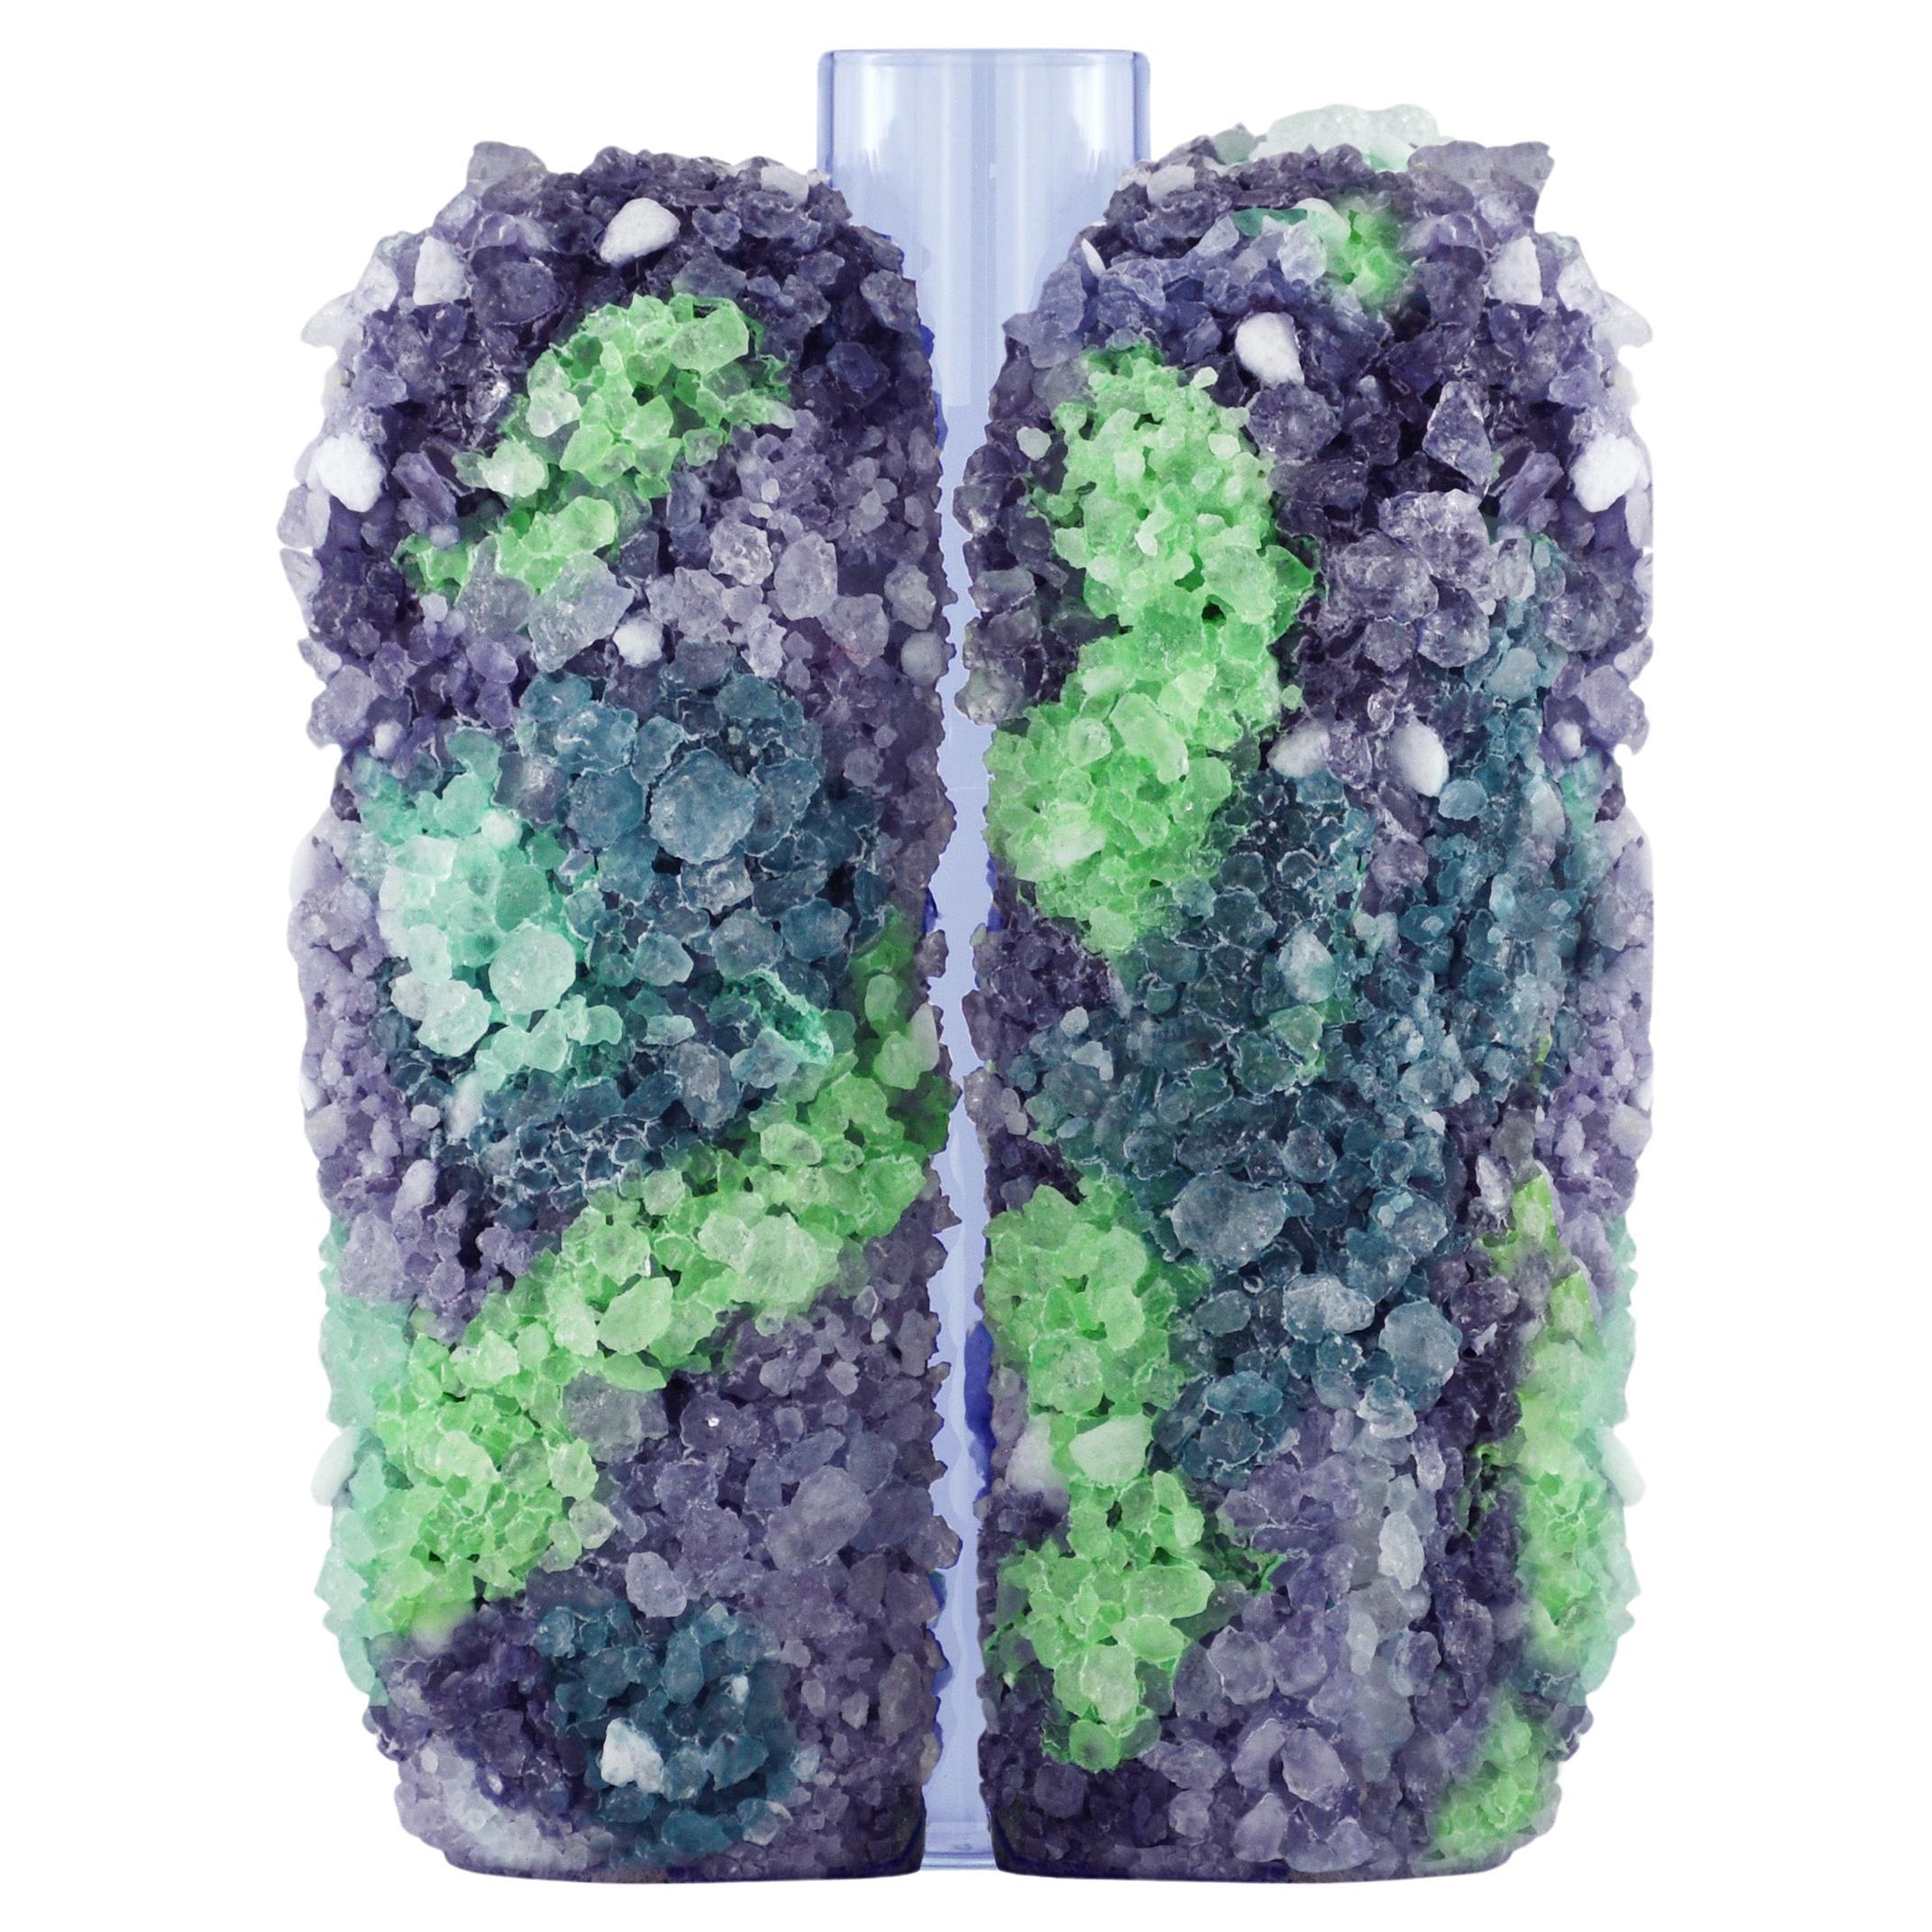 Violet & Green Handcrafted Stone with Rock Crystals Vase by COKI For Sale